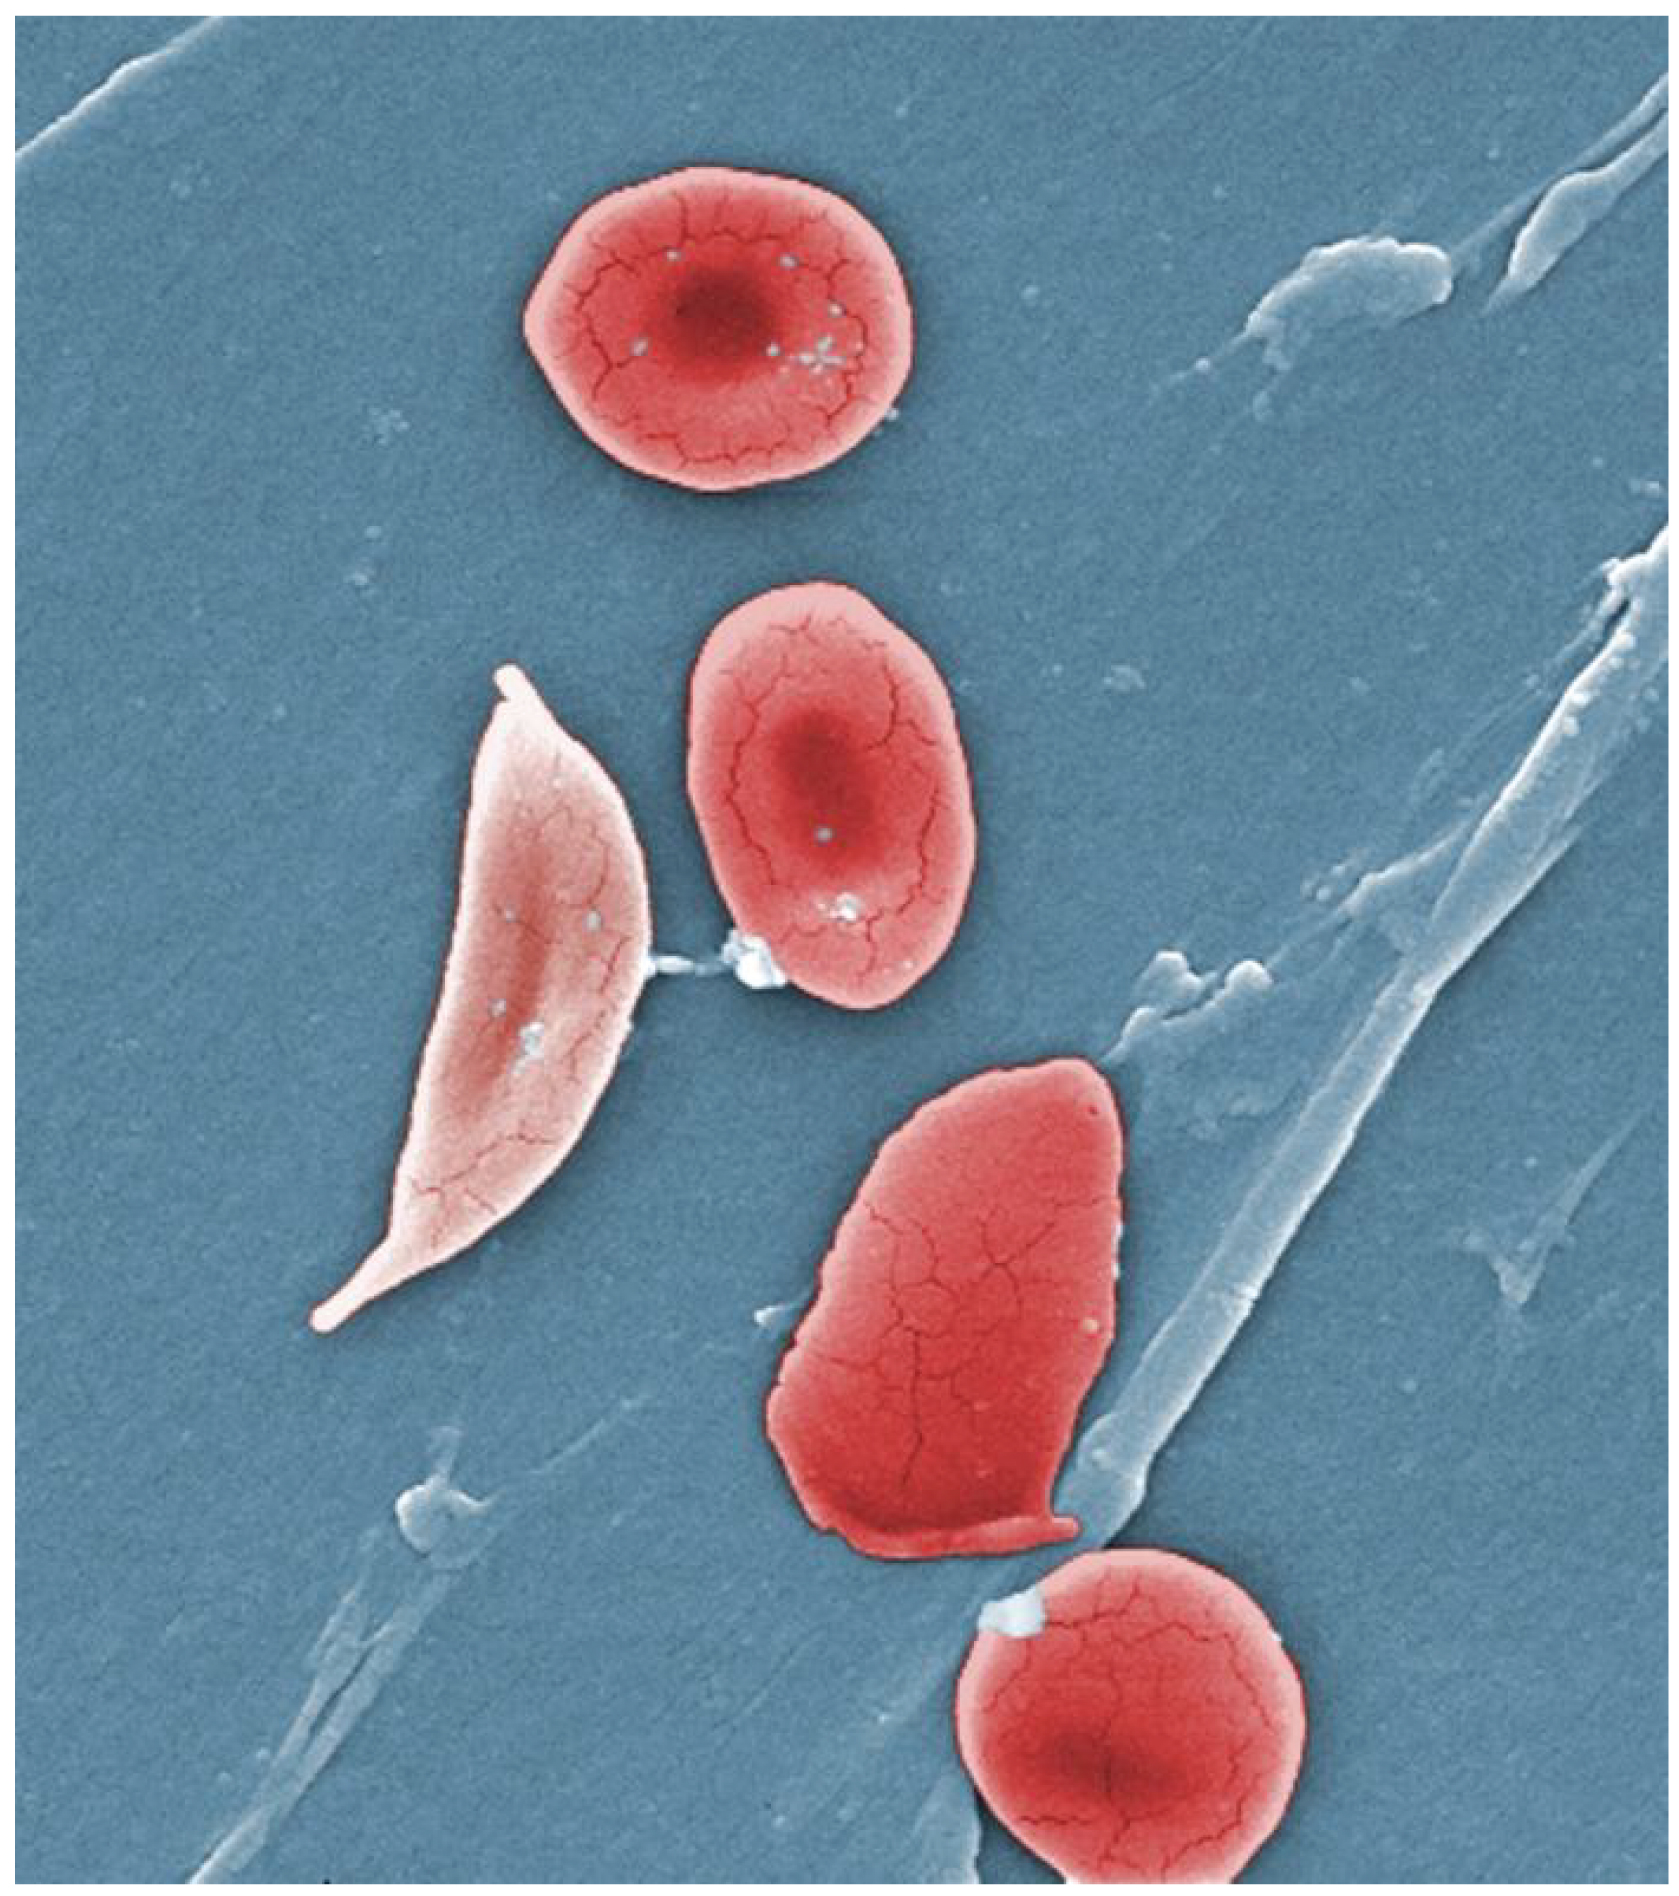 Normal blood cells next to a sickle blood cell, coloured scanning electron microscope image